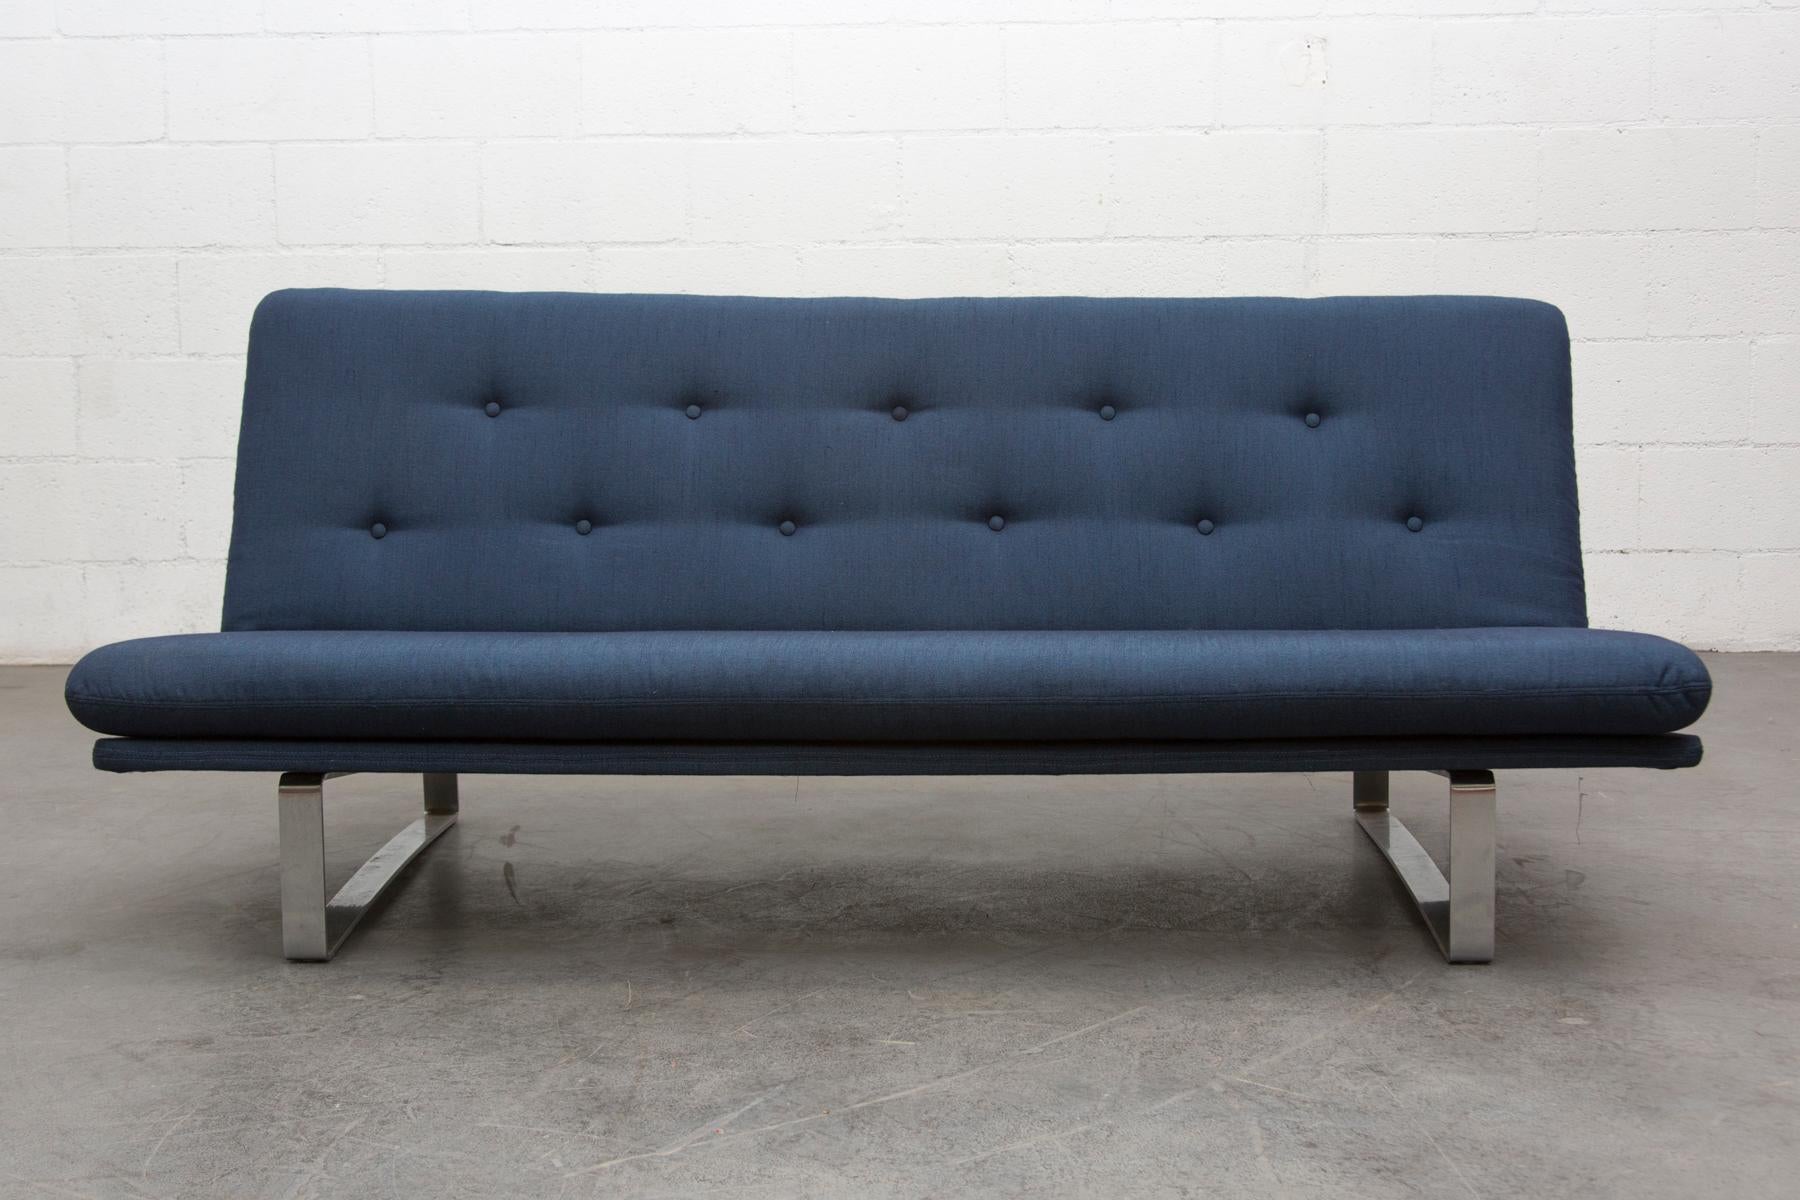 1968 Design by Kho Liang Ie with chrome frame and new indigo blue upholstery with tufted back. Frame in original condition with wear consistent with its age and usage. Other models and colors available and listed separately (LU922412084051,